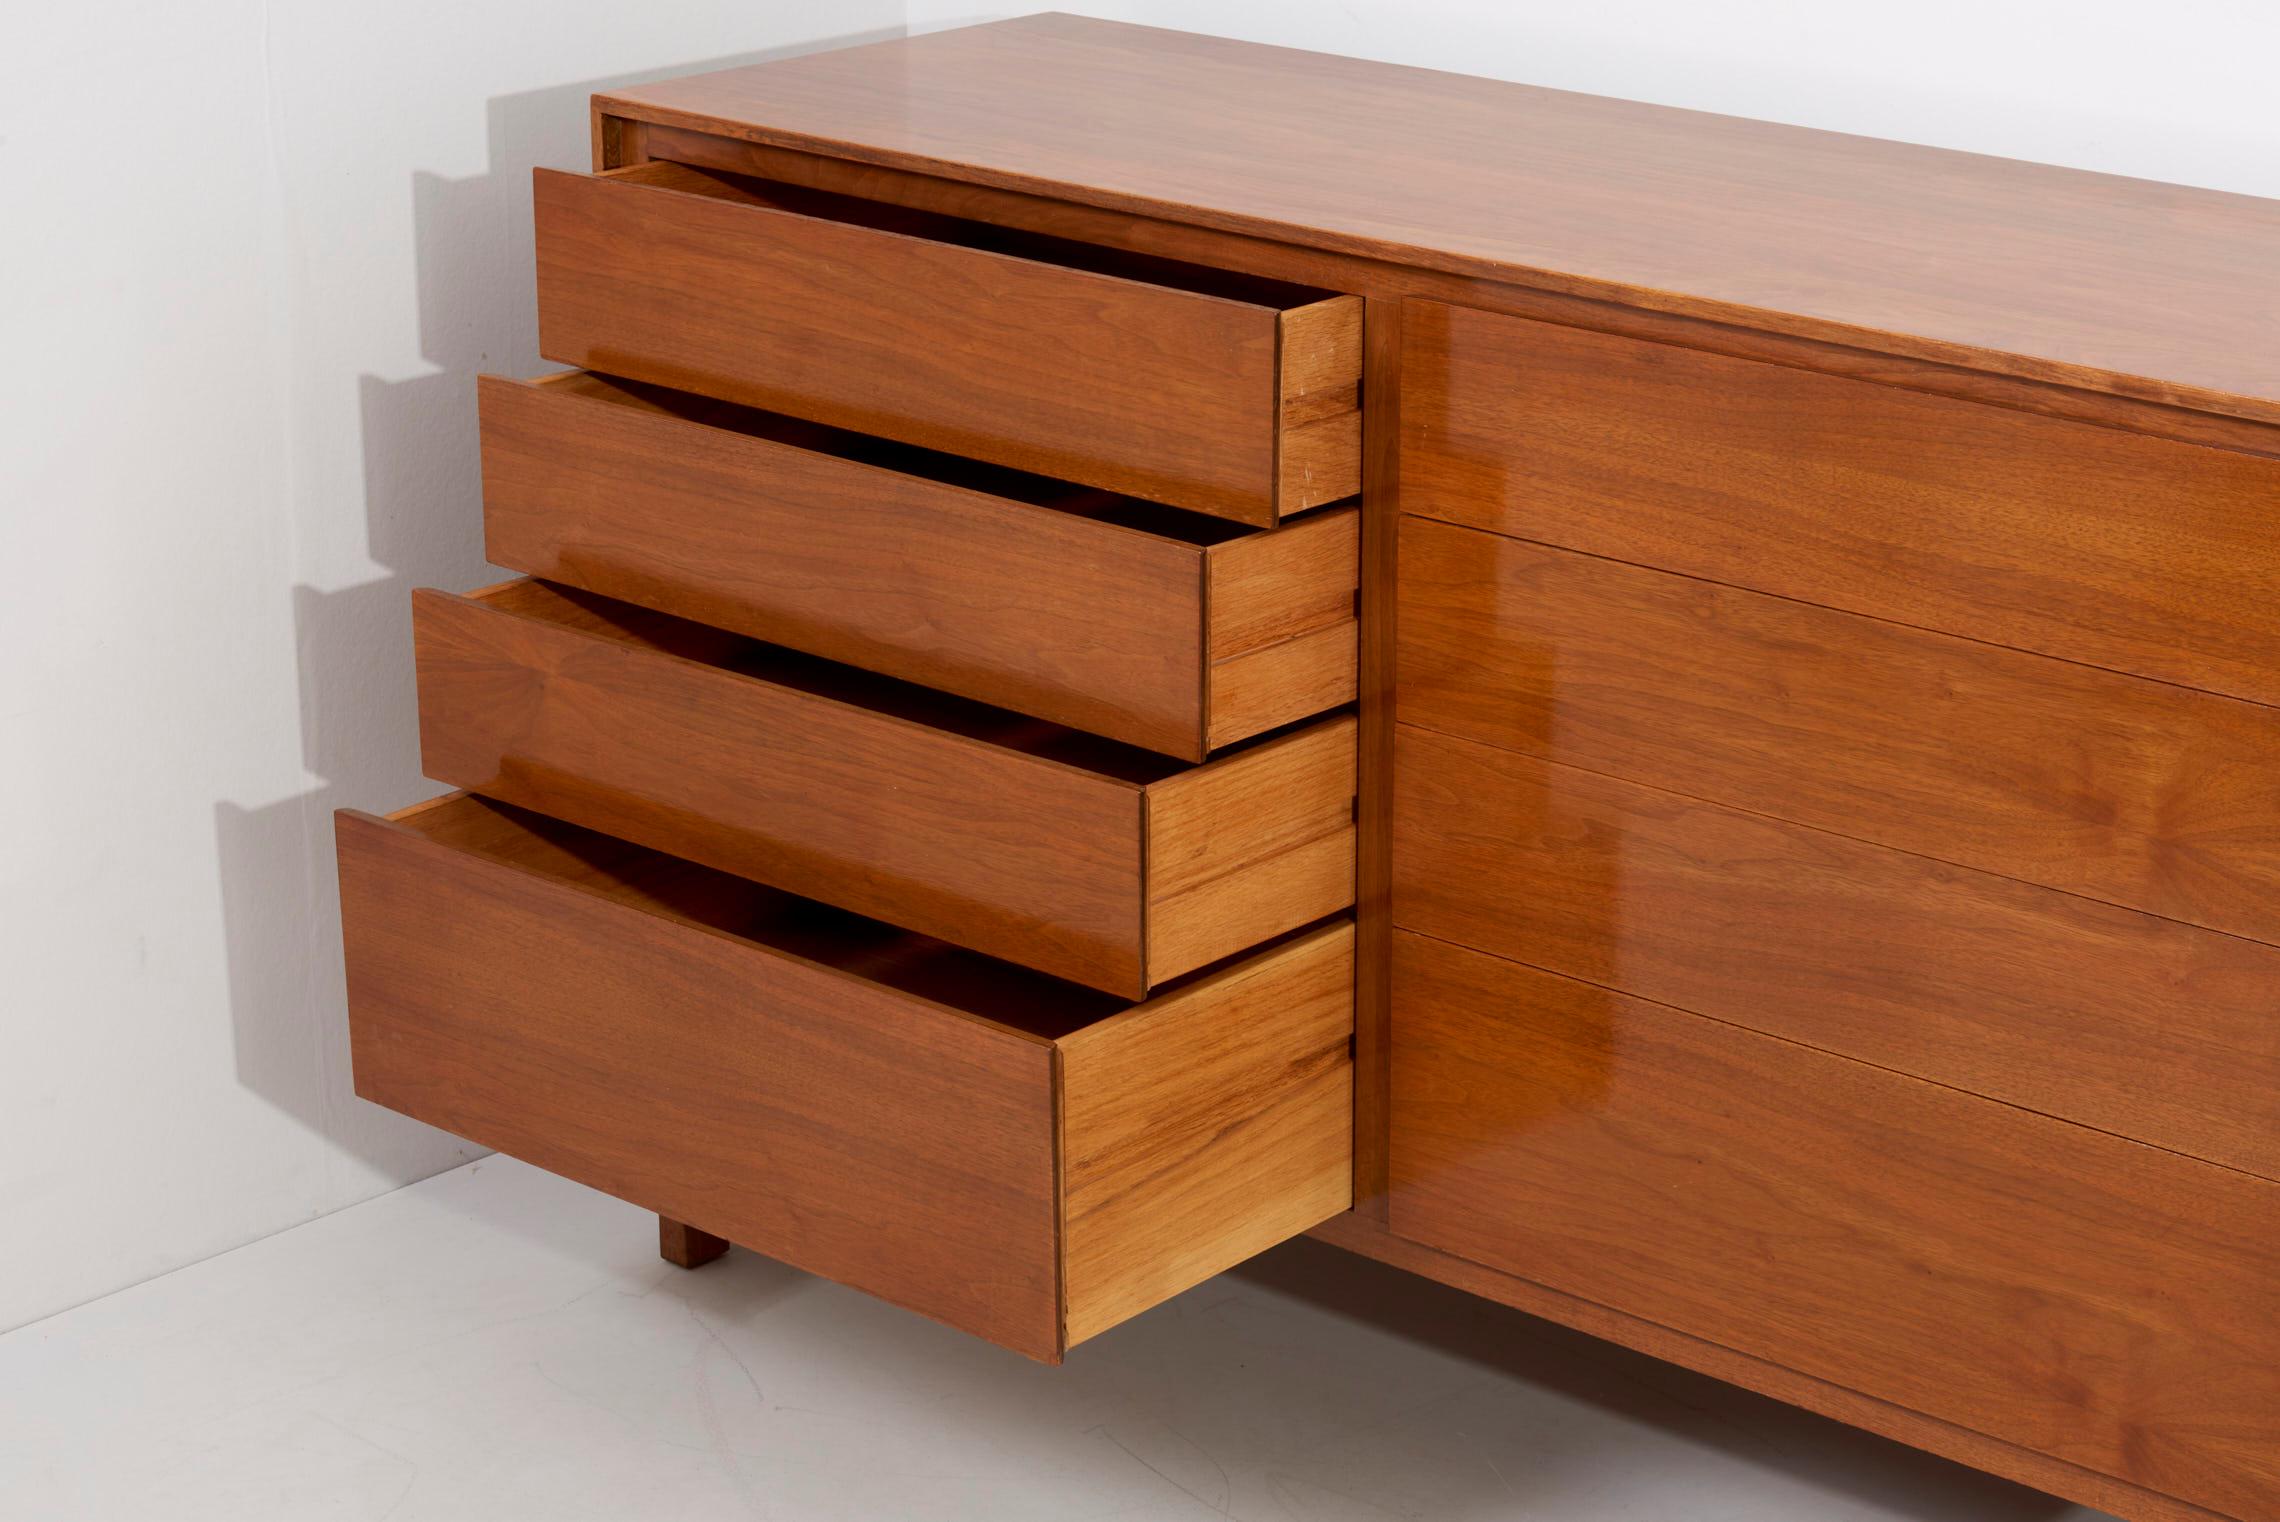 Modernist Sideboard in Walnut by Allan Gould, USA 1960s For Sale 3